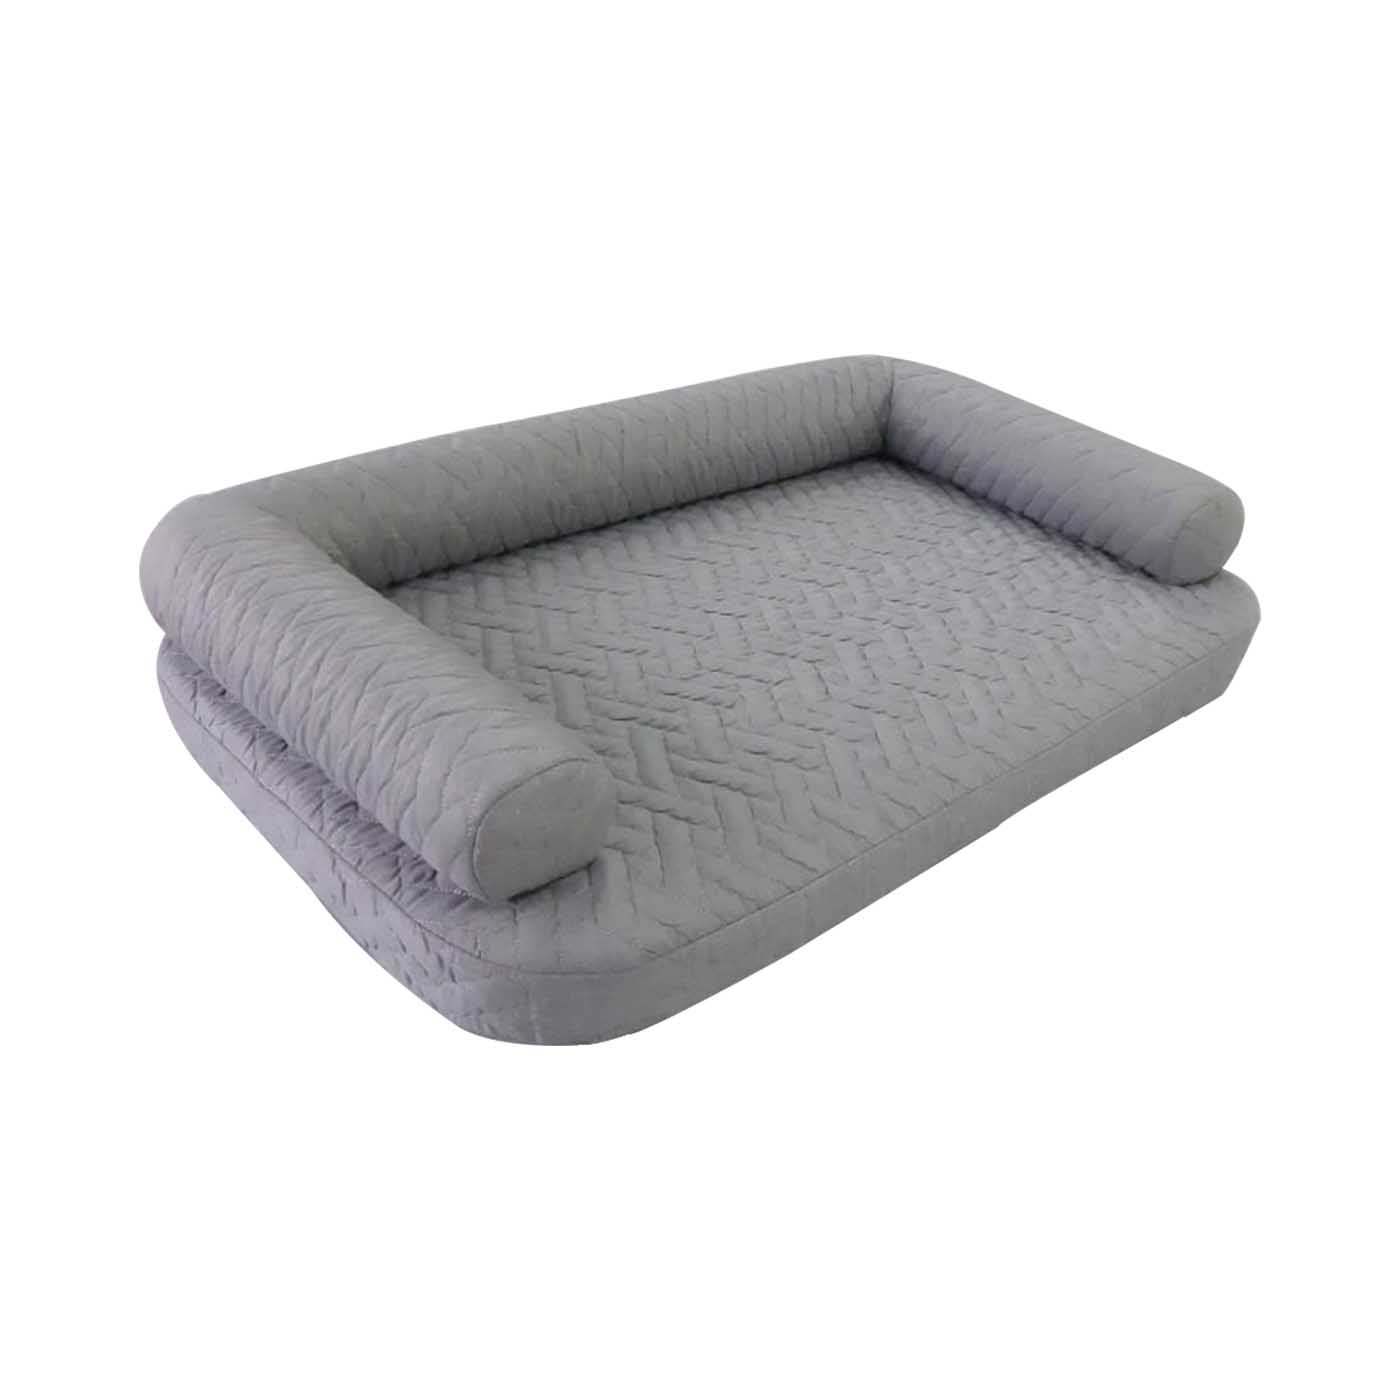 The Grey Pohovka Pet Bed